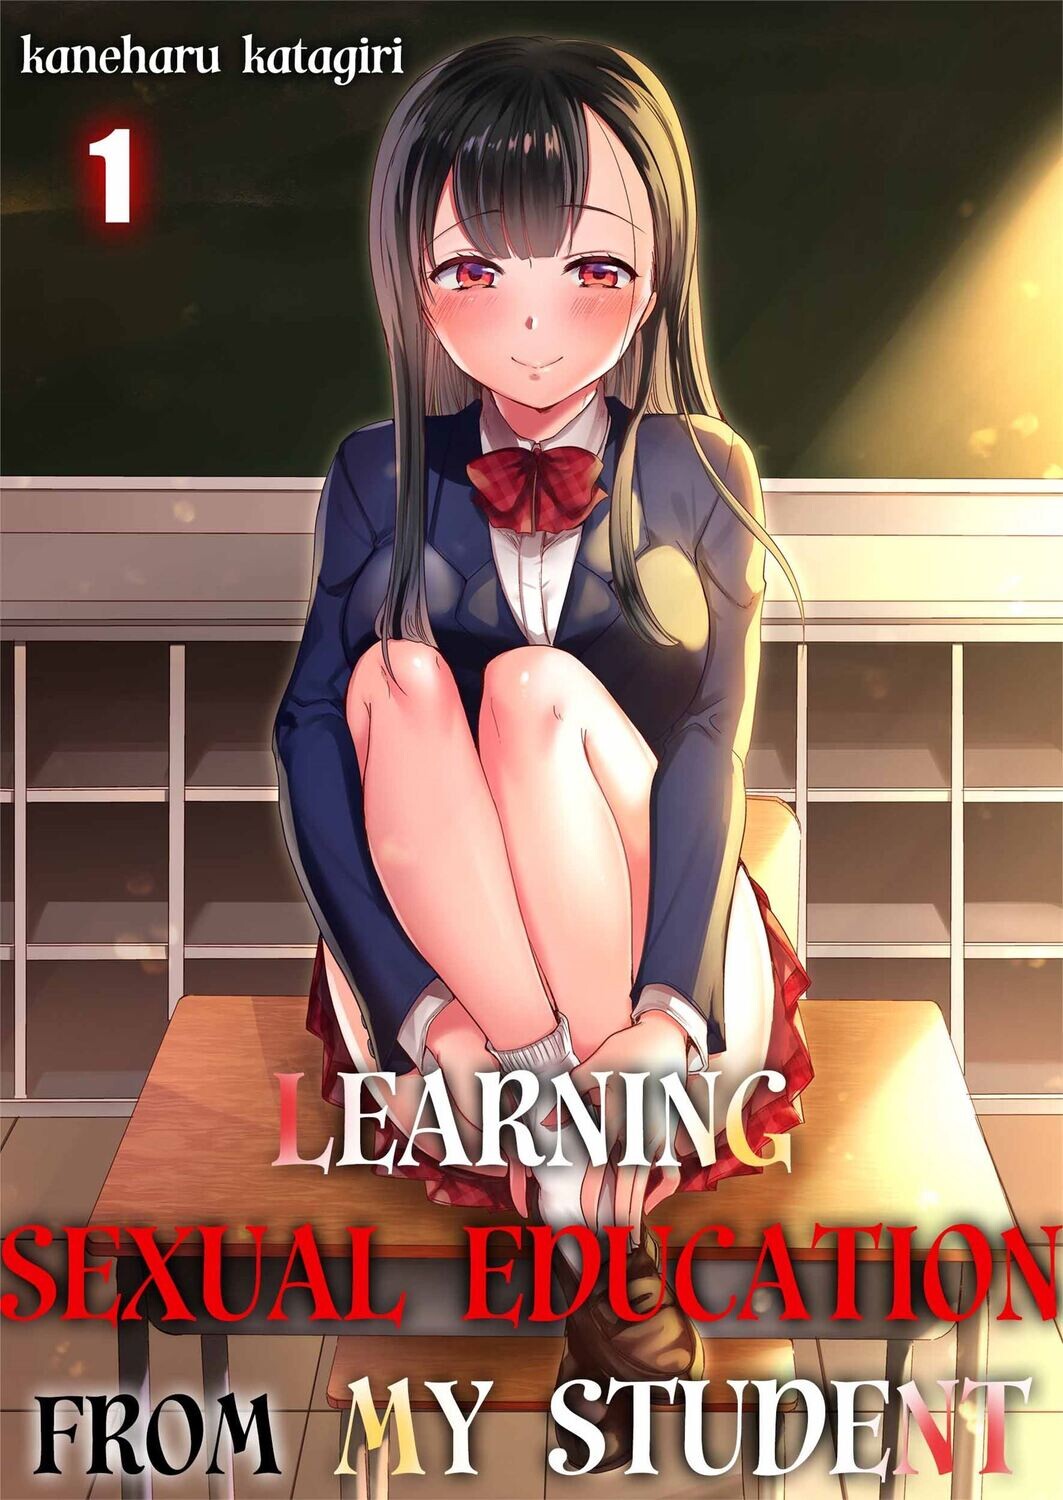 Learning Sexual Education From My Student Ch. 1 (DIGITAL)